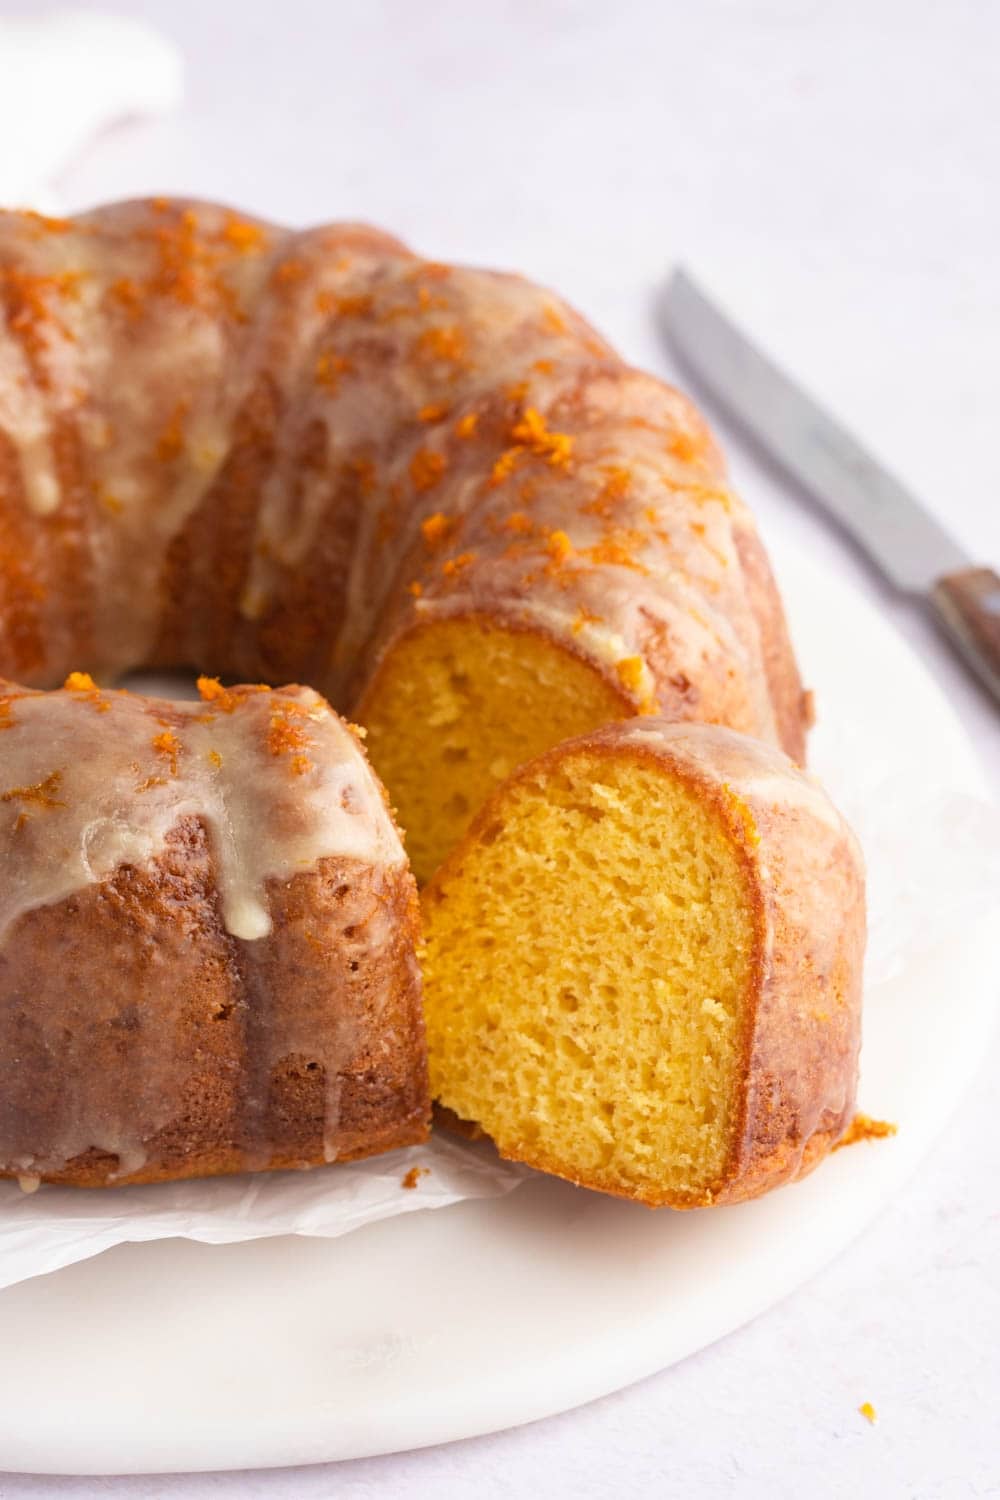 Moist and Fluffy Orange Cake with Glaze, Portion Sliced, Drizzled With Cream Sugar and Orange Zest